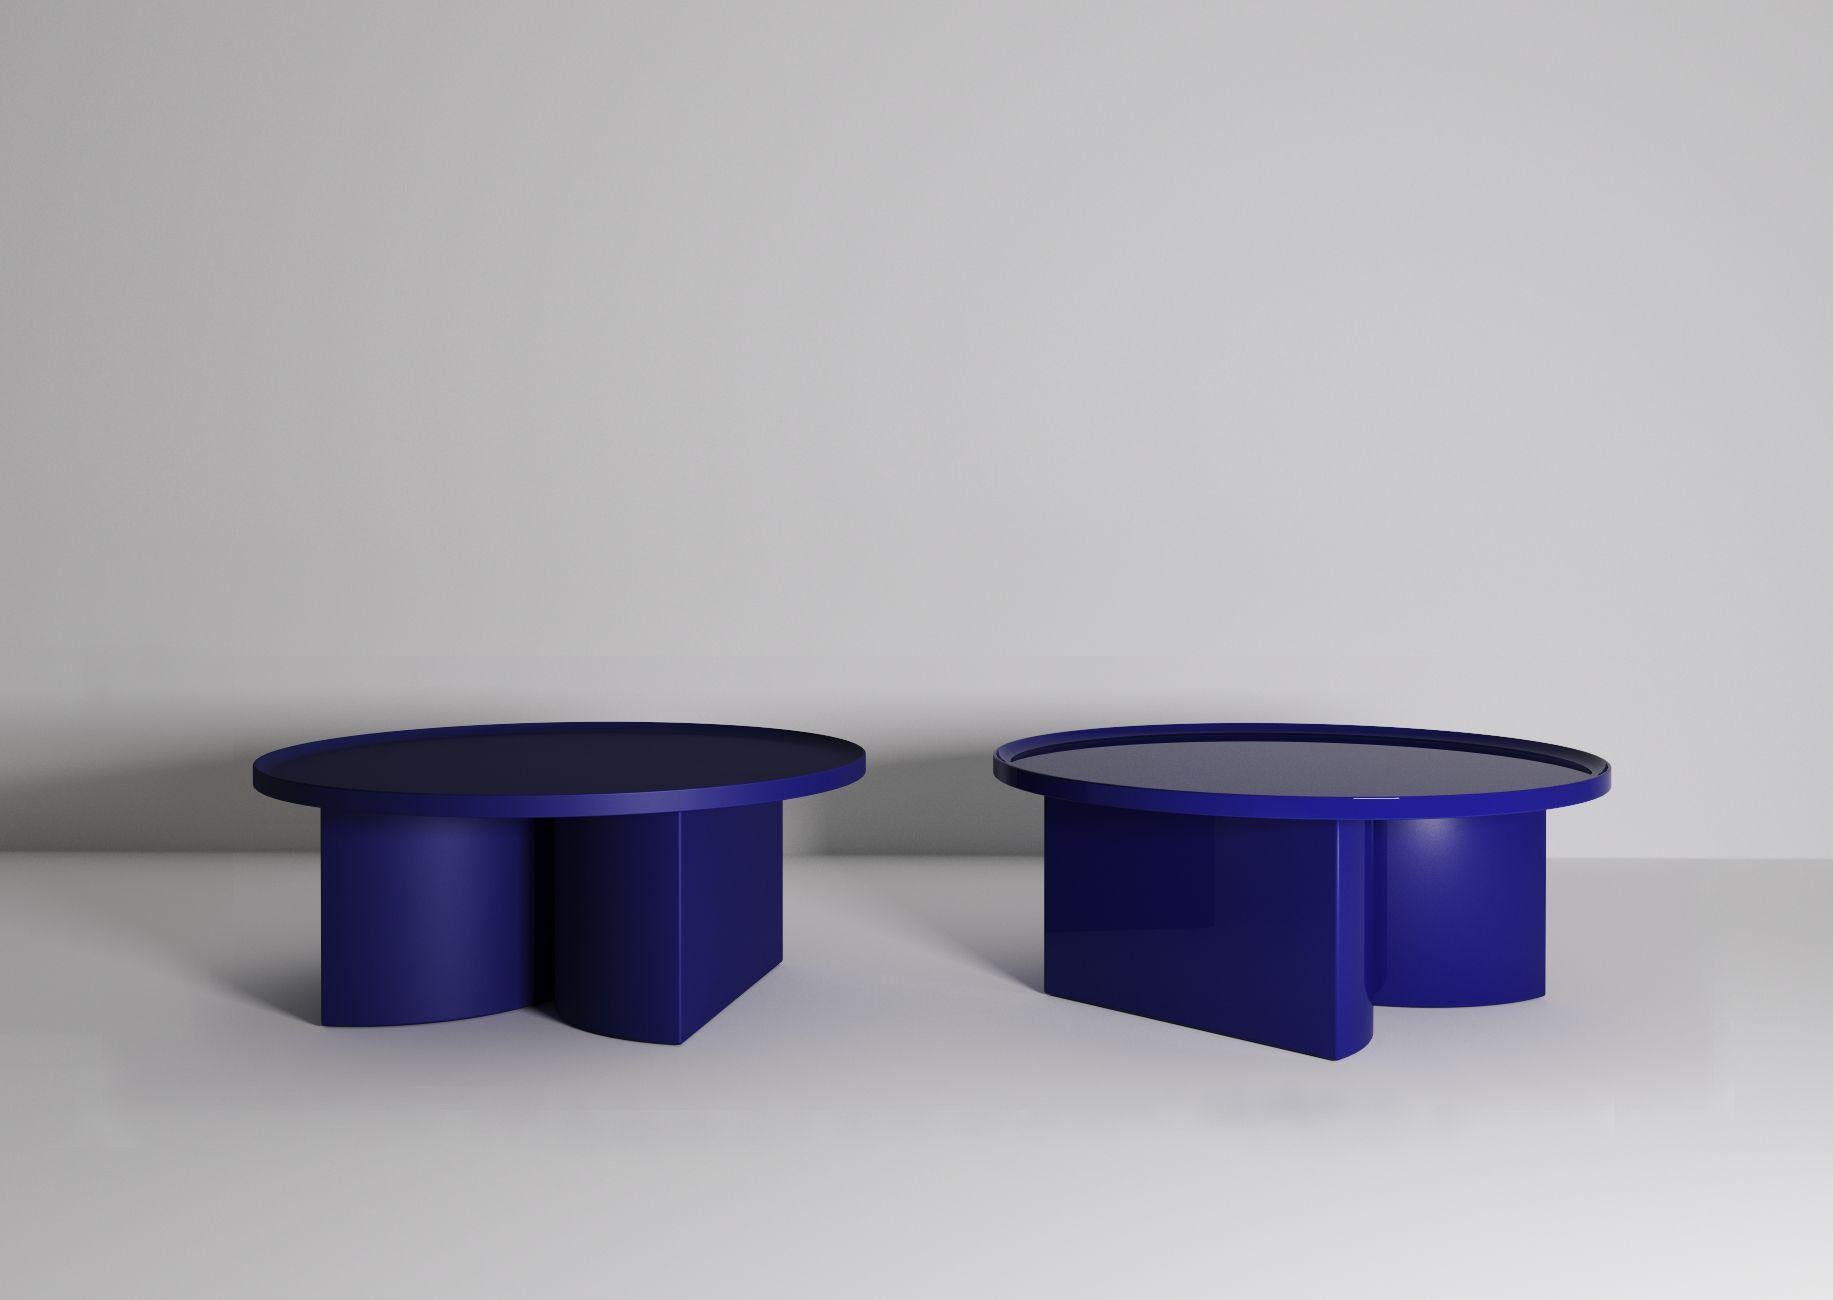 Set of 2 Constantin table by Jirí Krejcirík
Dimensions: 87 x 87 x 42 cm
Material: Steel Alloys


The tables entitled Odyssey and Kalokagathos represent the dialogue between the aesthetics of ancient Greece and the aesthetics of Slovene